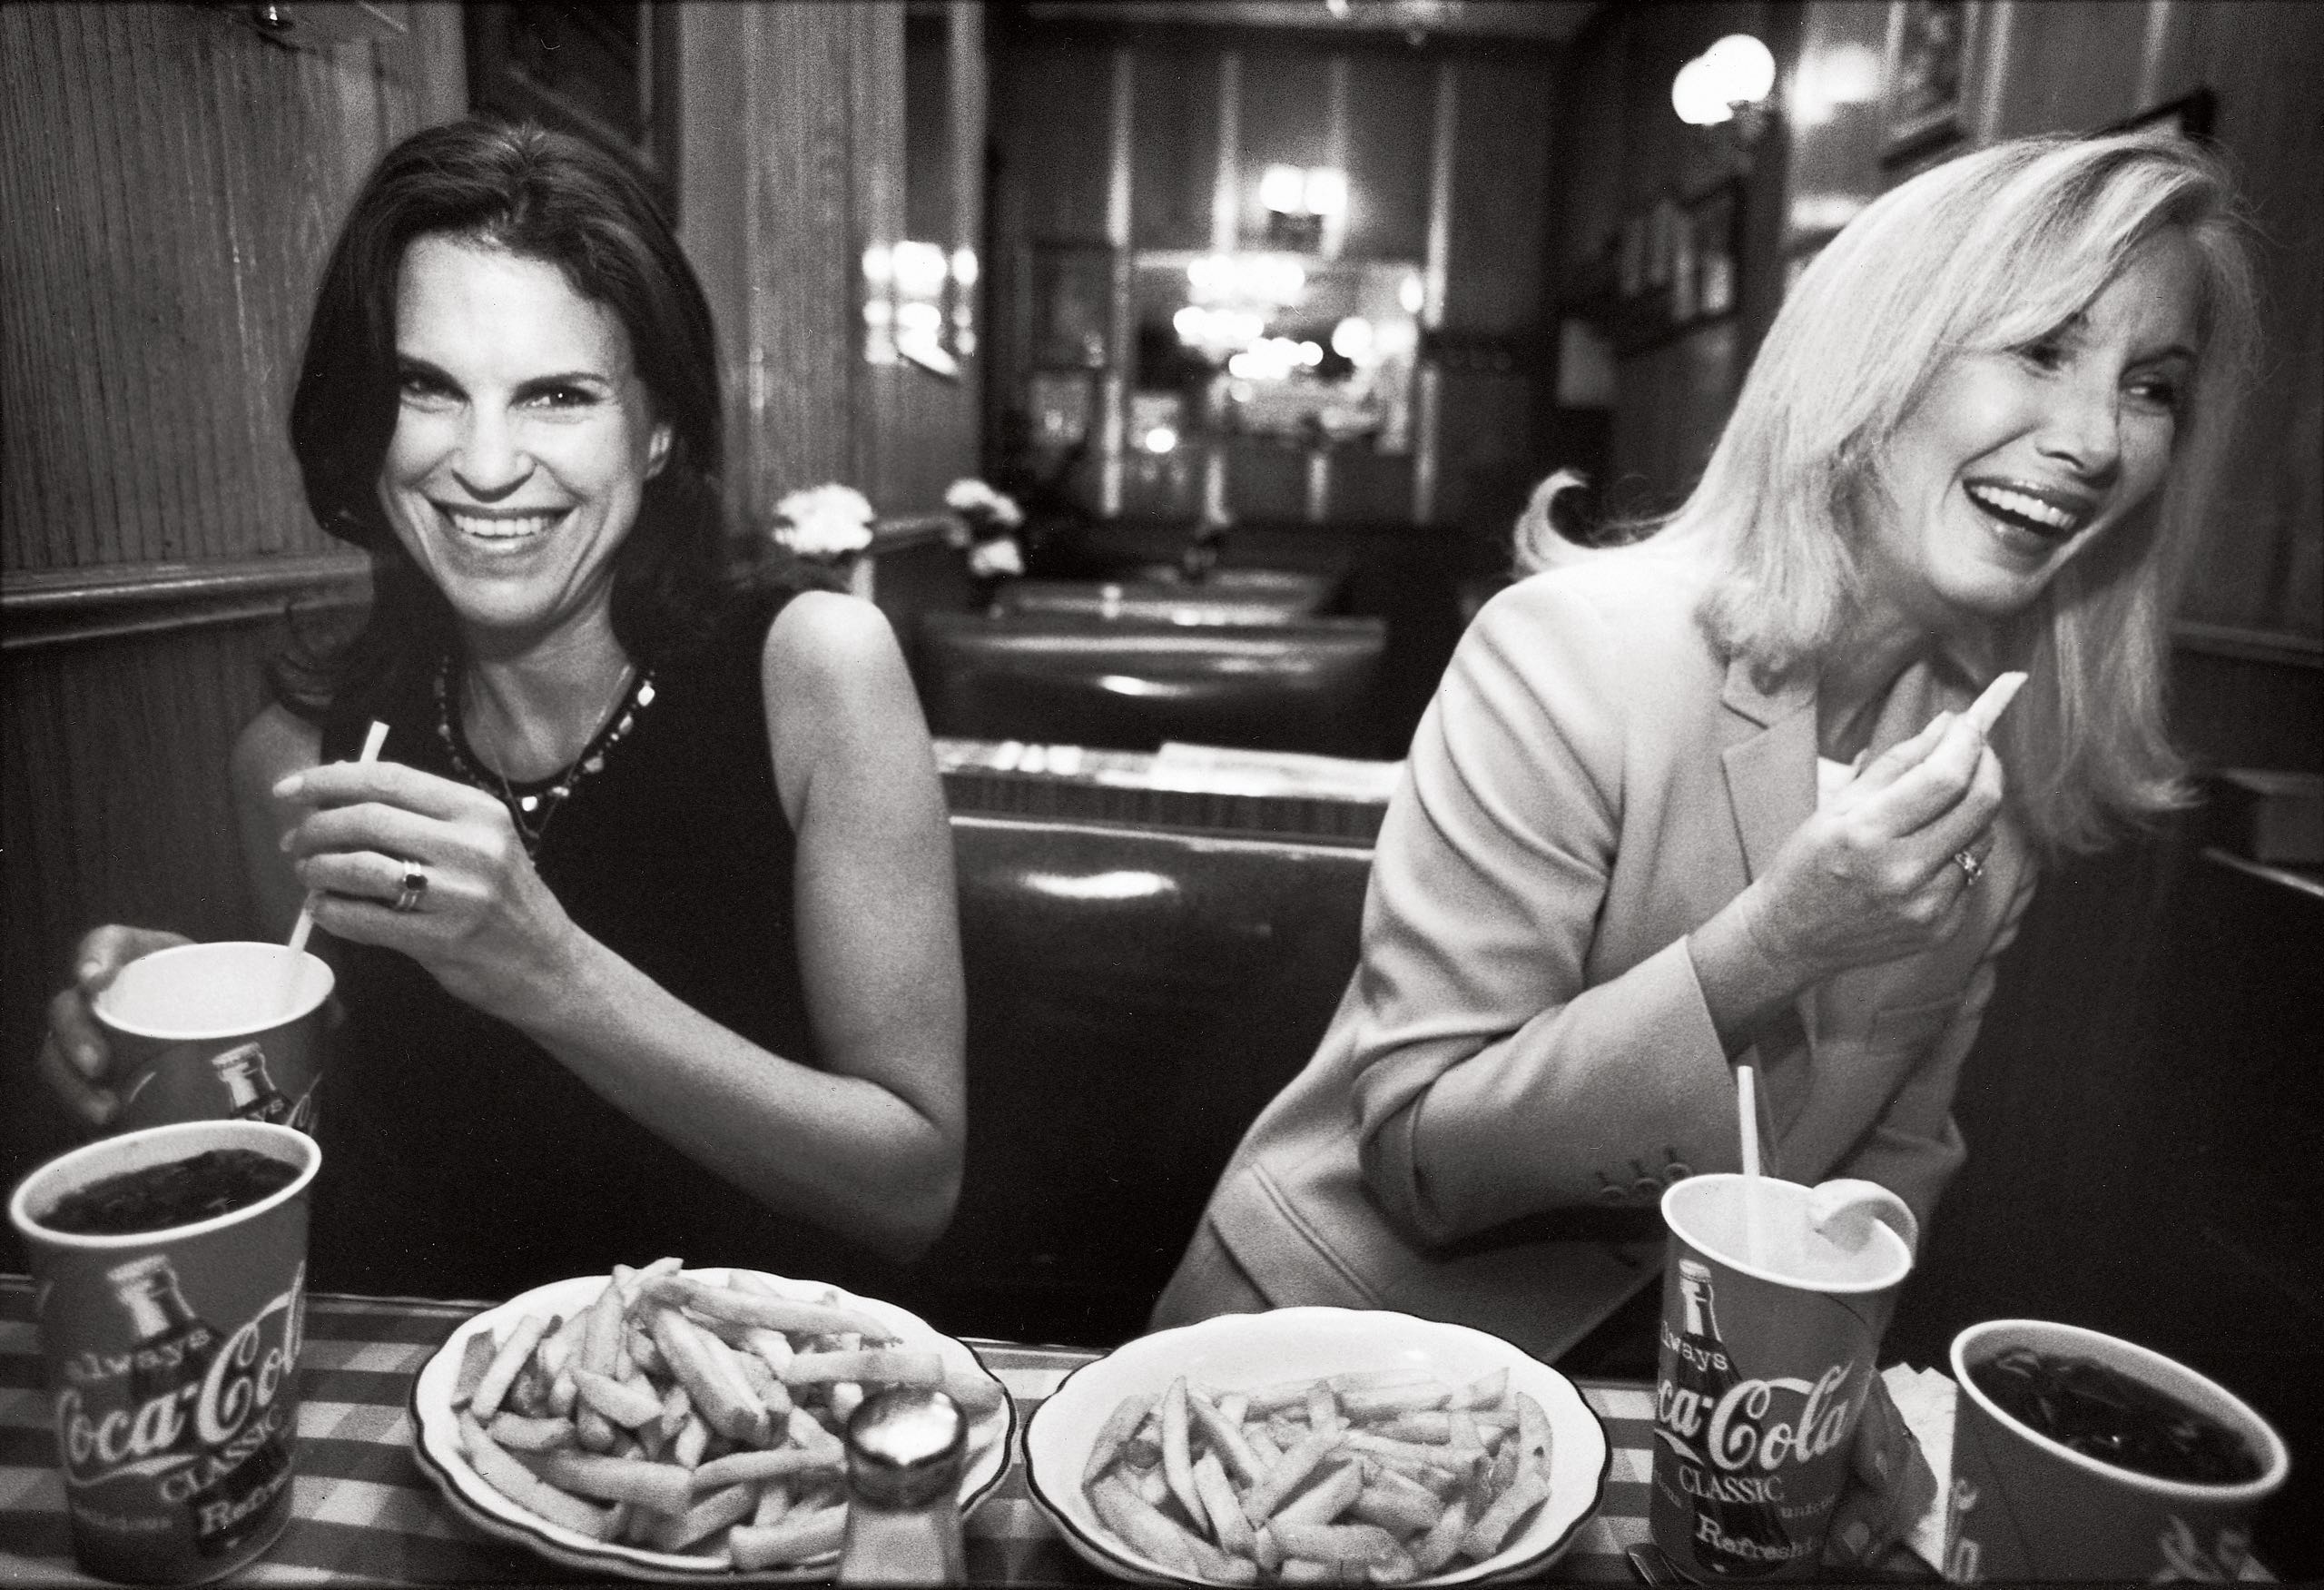 Candice Carpenter (left) and Nancy Evans (right). Image credit: The New Yorker